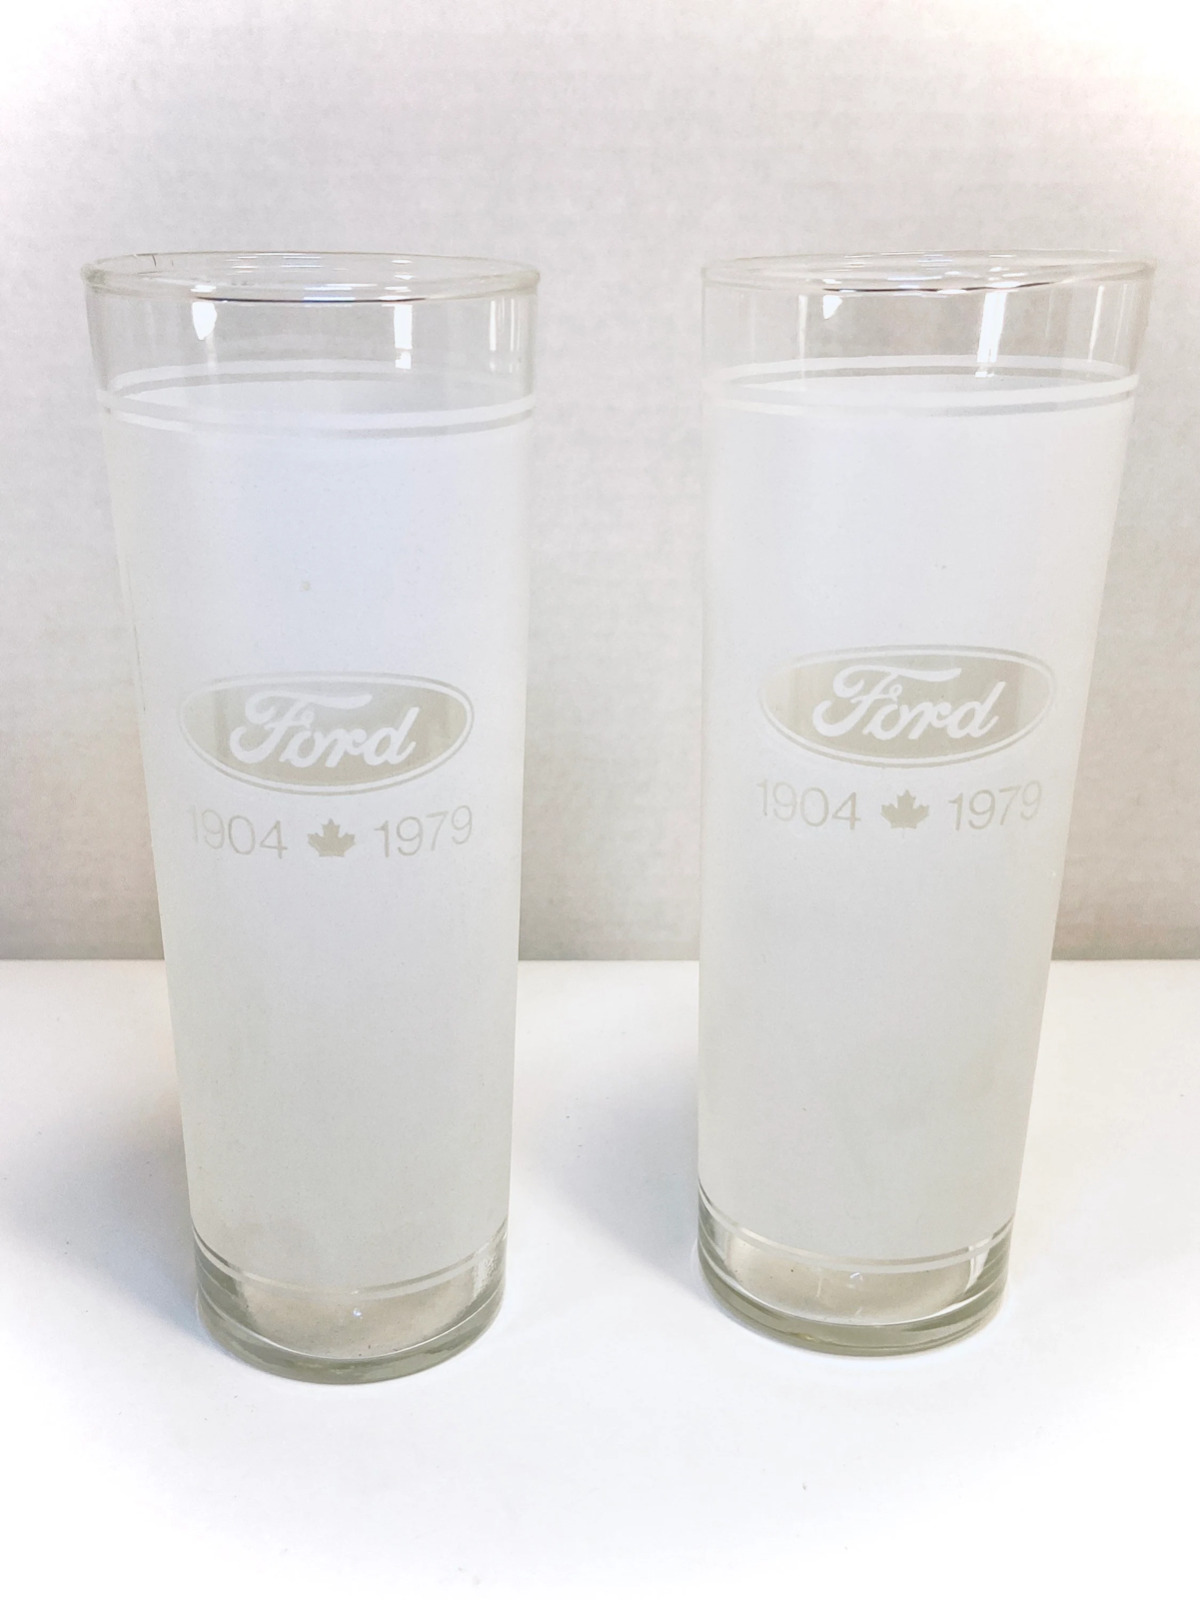 SALE RARE Ford 1979 Vintage Frosted Glasses Auto Collectible By Federal Glass